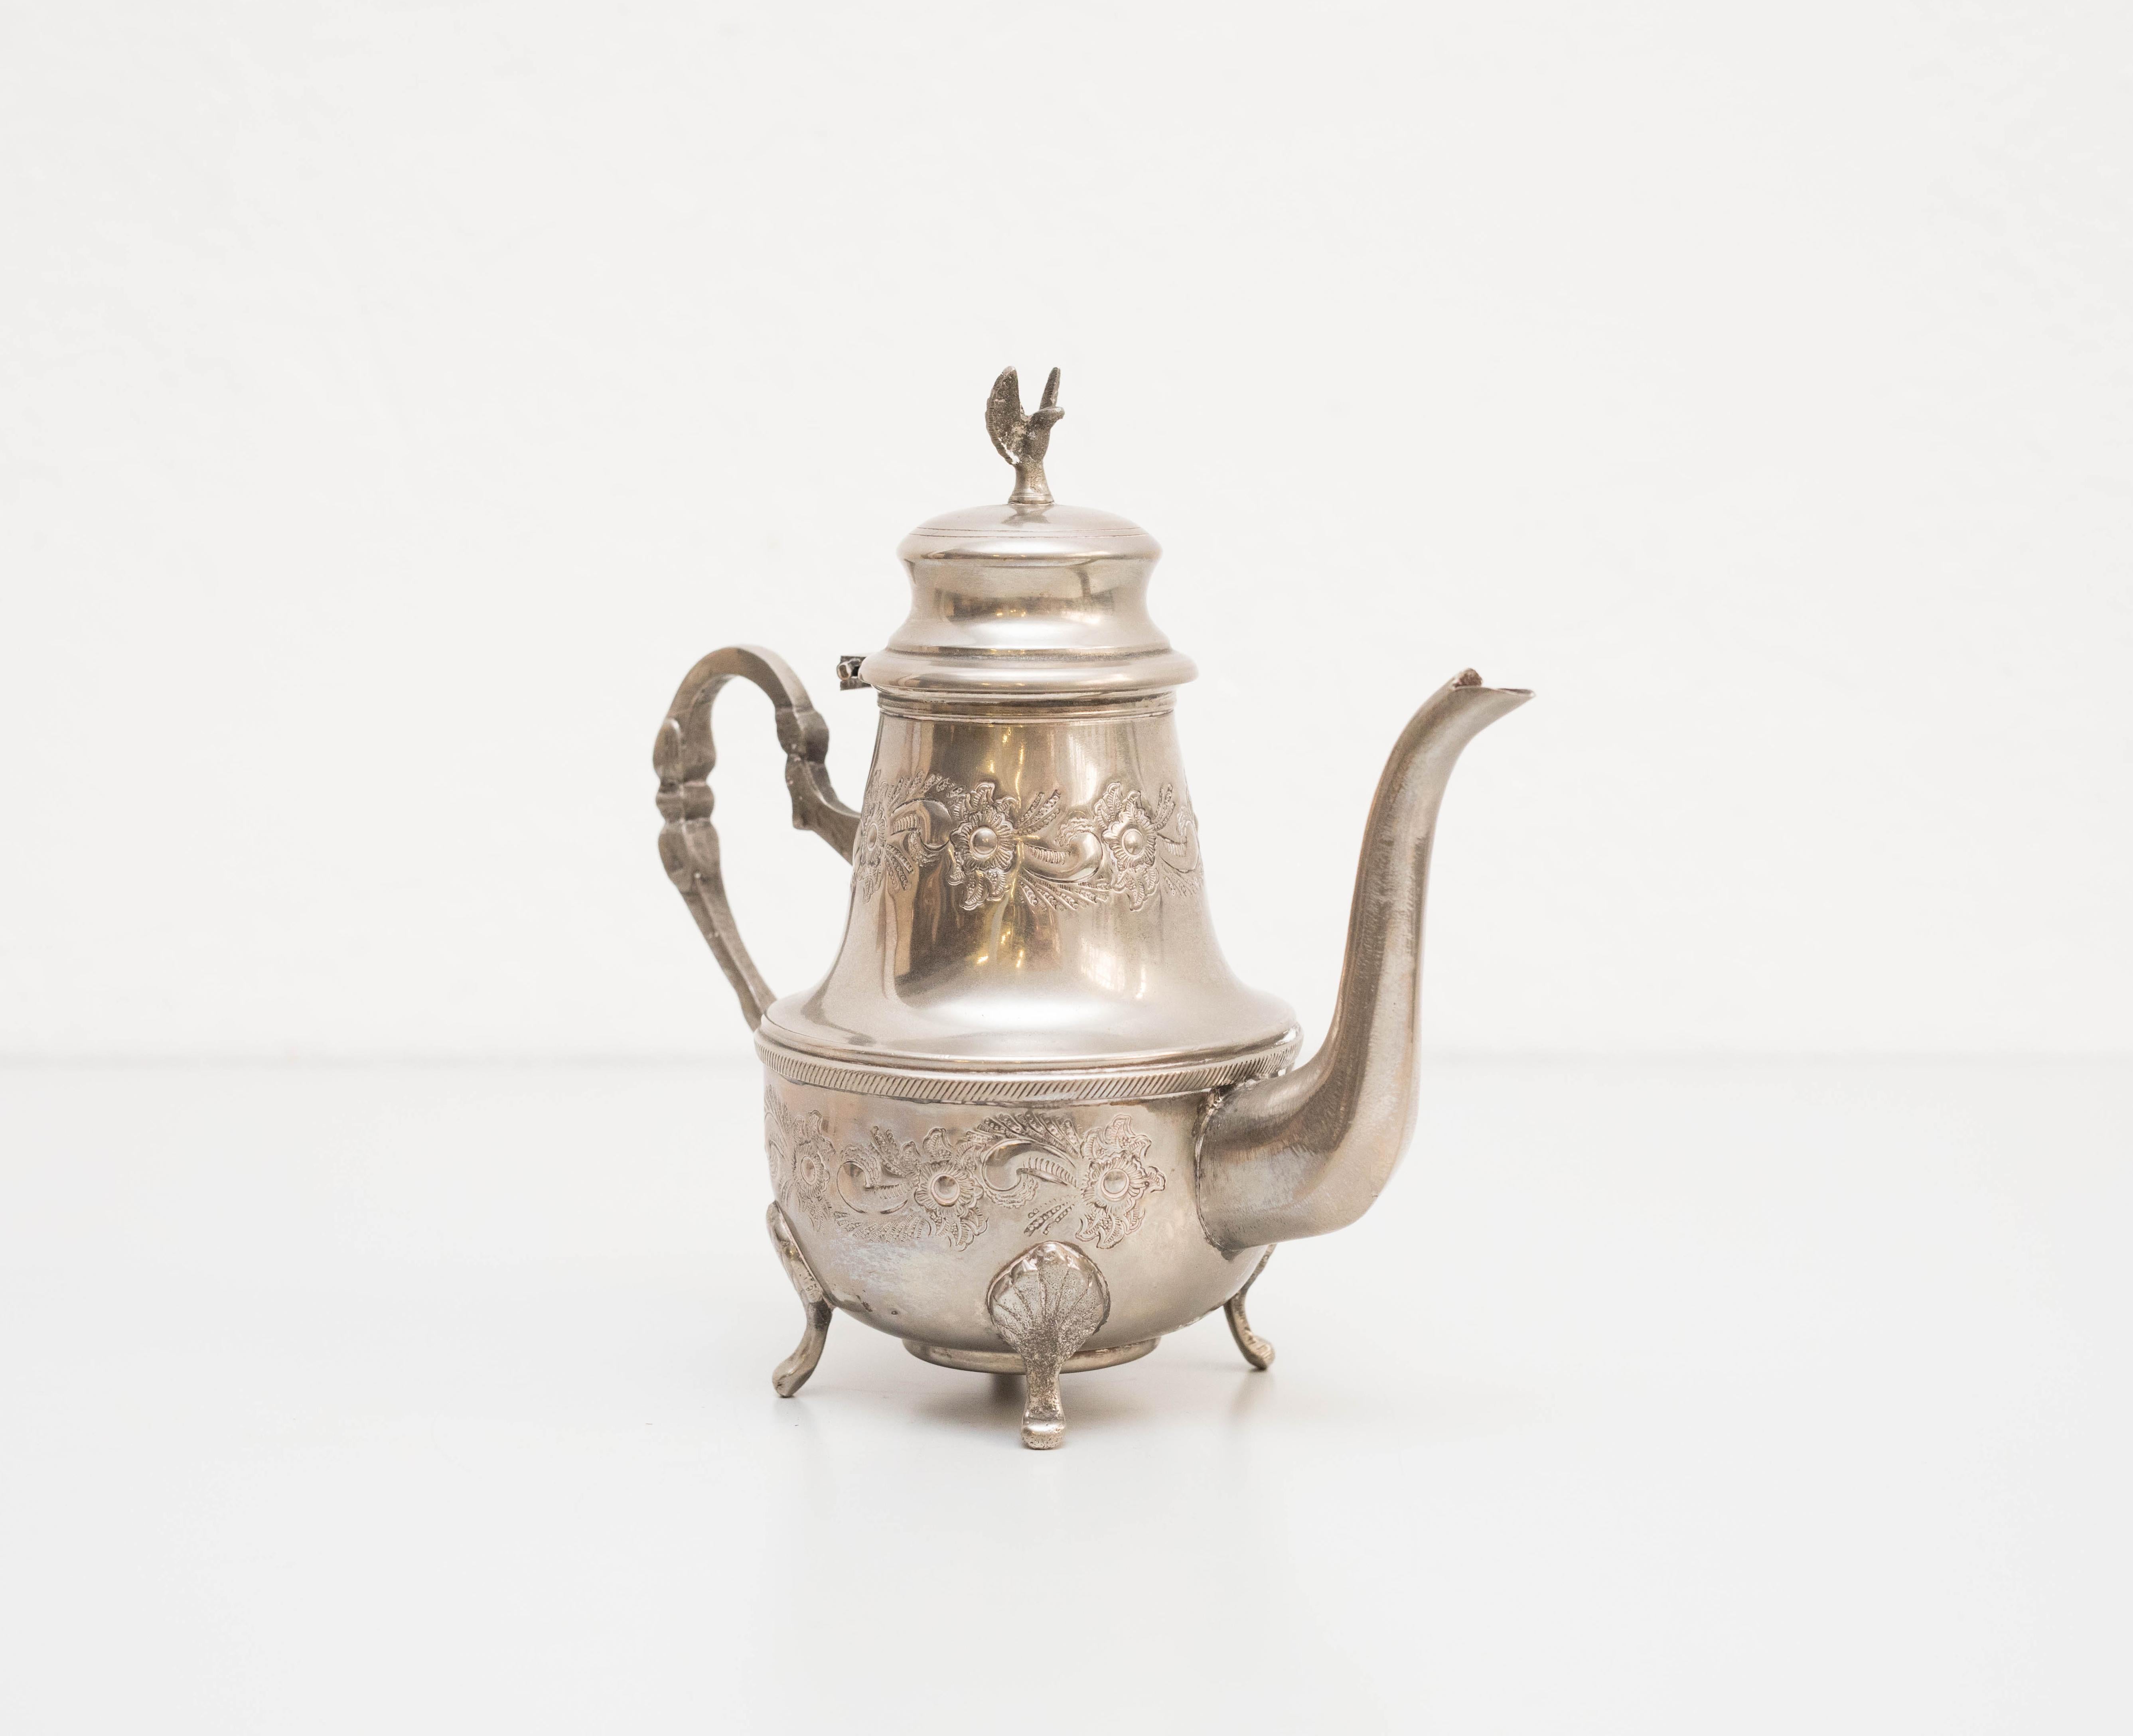 20th century Brass teapot.
By unknown manufacturer, Spain.

In original condition, with minor wear consistent with age and use, preserving a beautiful patina.

Materials:
Brass

Dimensions:
D 10 cm x W 23 cm x H 21 cm.